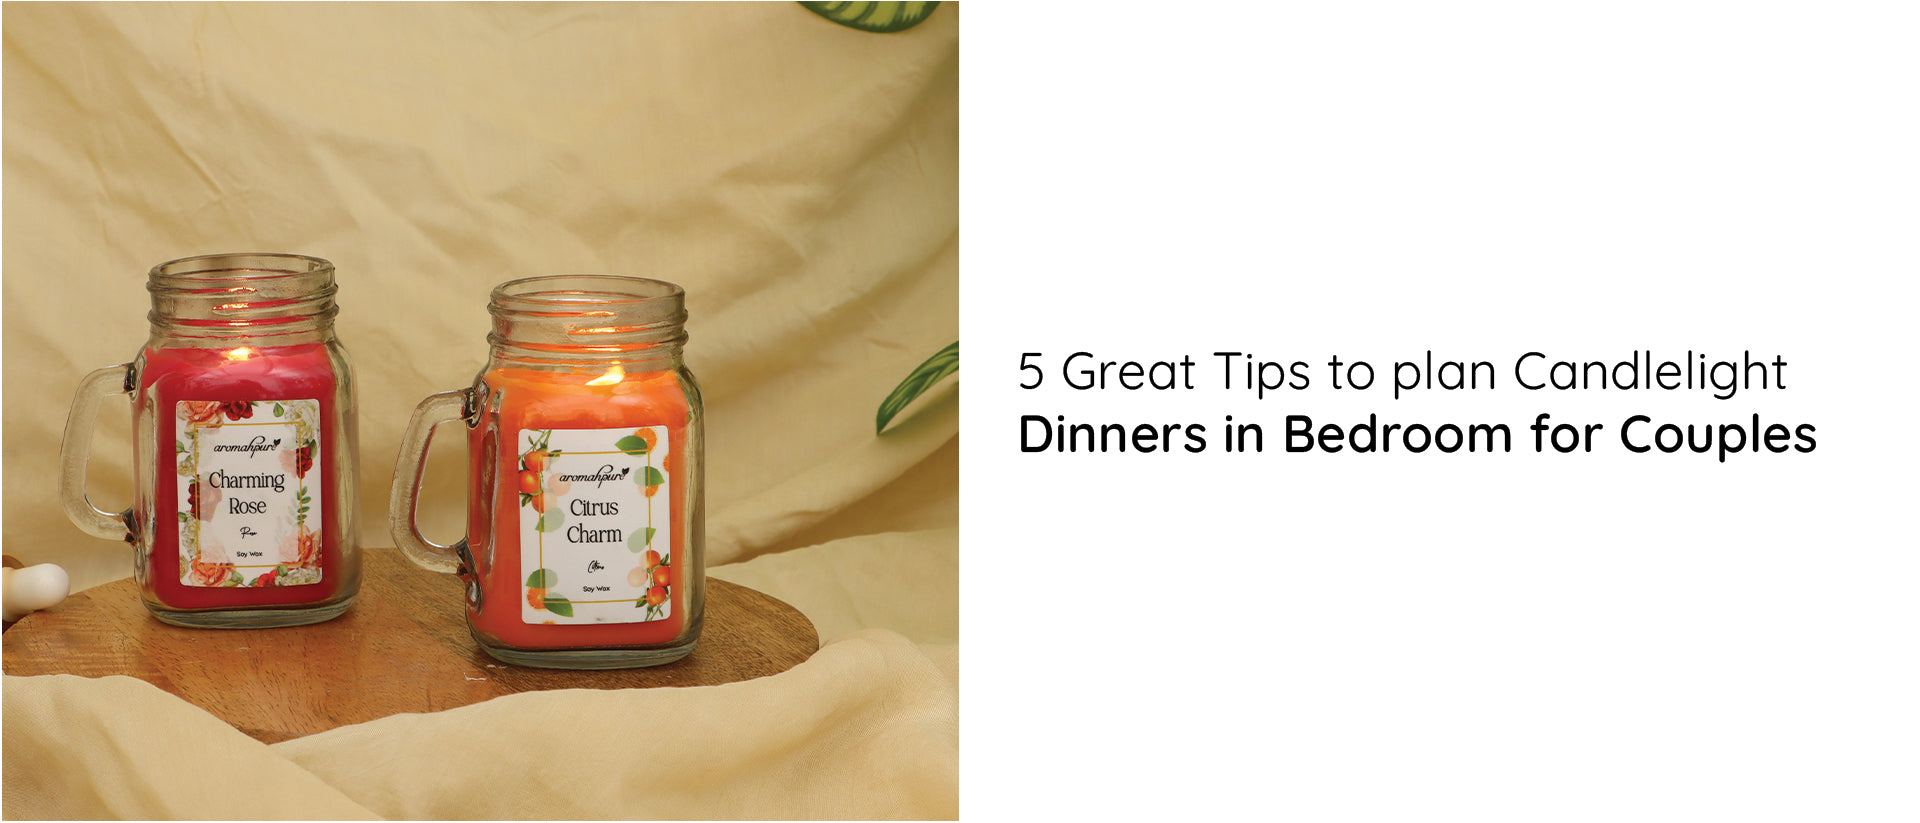 5 Great Tips to plan Candlelight Dinners in Bedroom for Couples